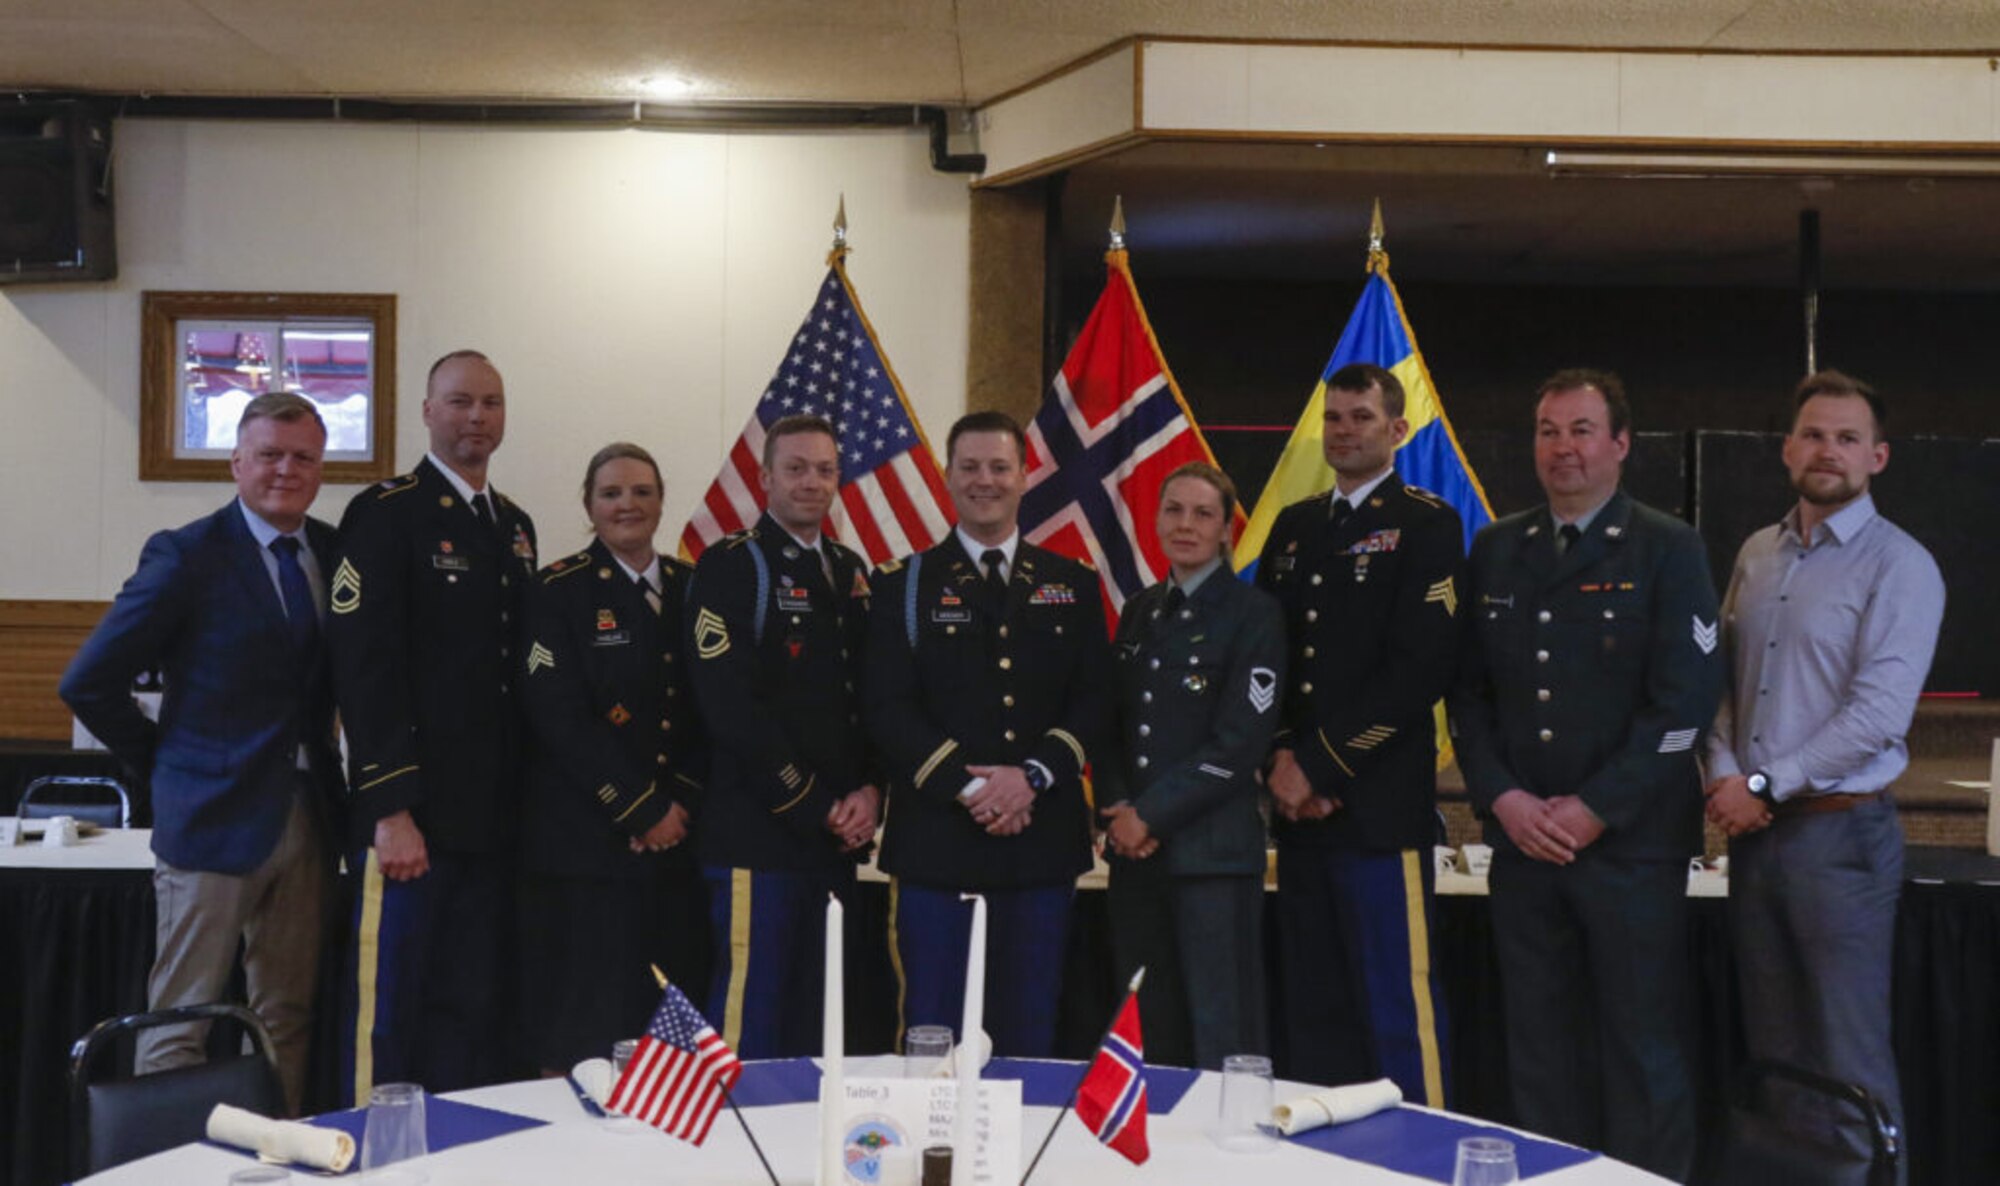 Participants of the 49th annual Norwegian Exchange, from the Norwegian Heimevernet, or Home Guard, and the Minnesota National Guard, community leaders, buddy weekend host families and distinguished guests joined for a farewell banquet, April 3, 2022, at the Falls Ballroom in Little Falls, Minnesota.